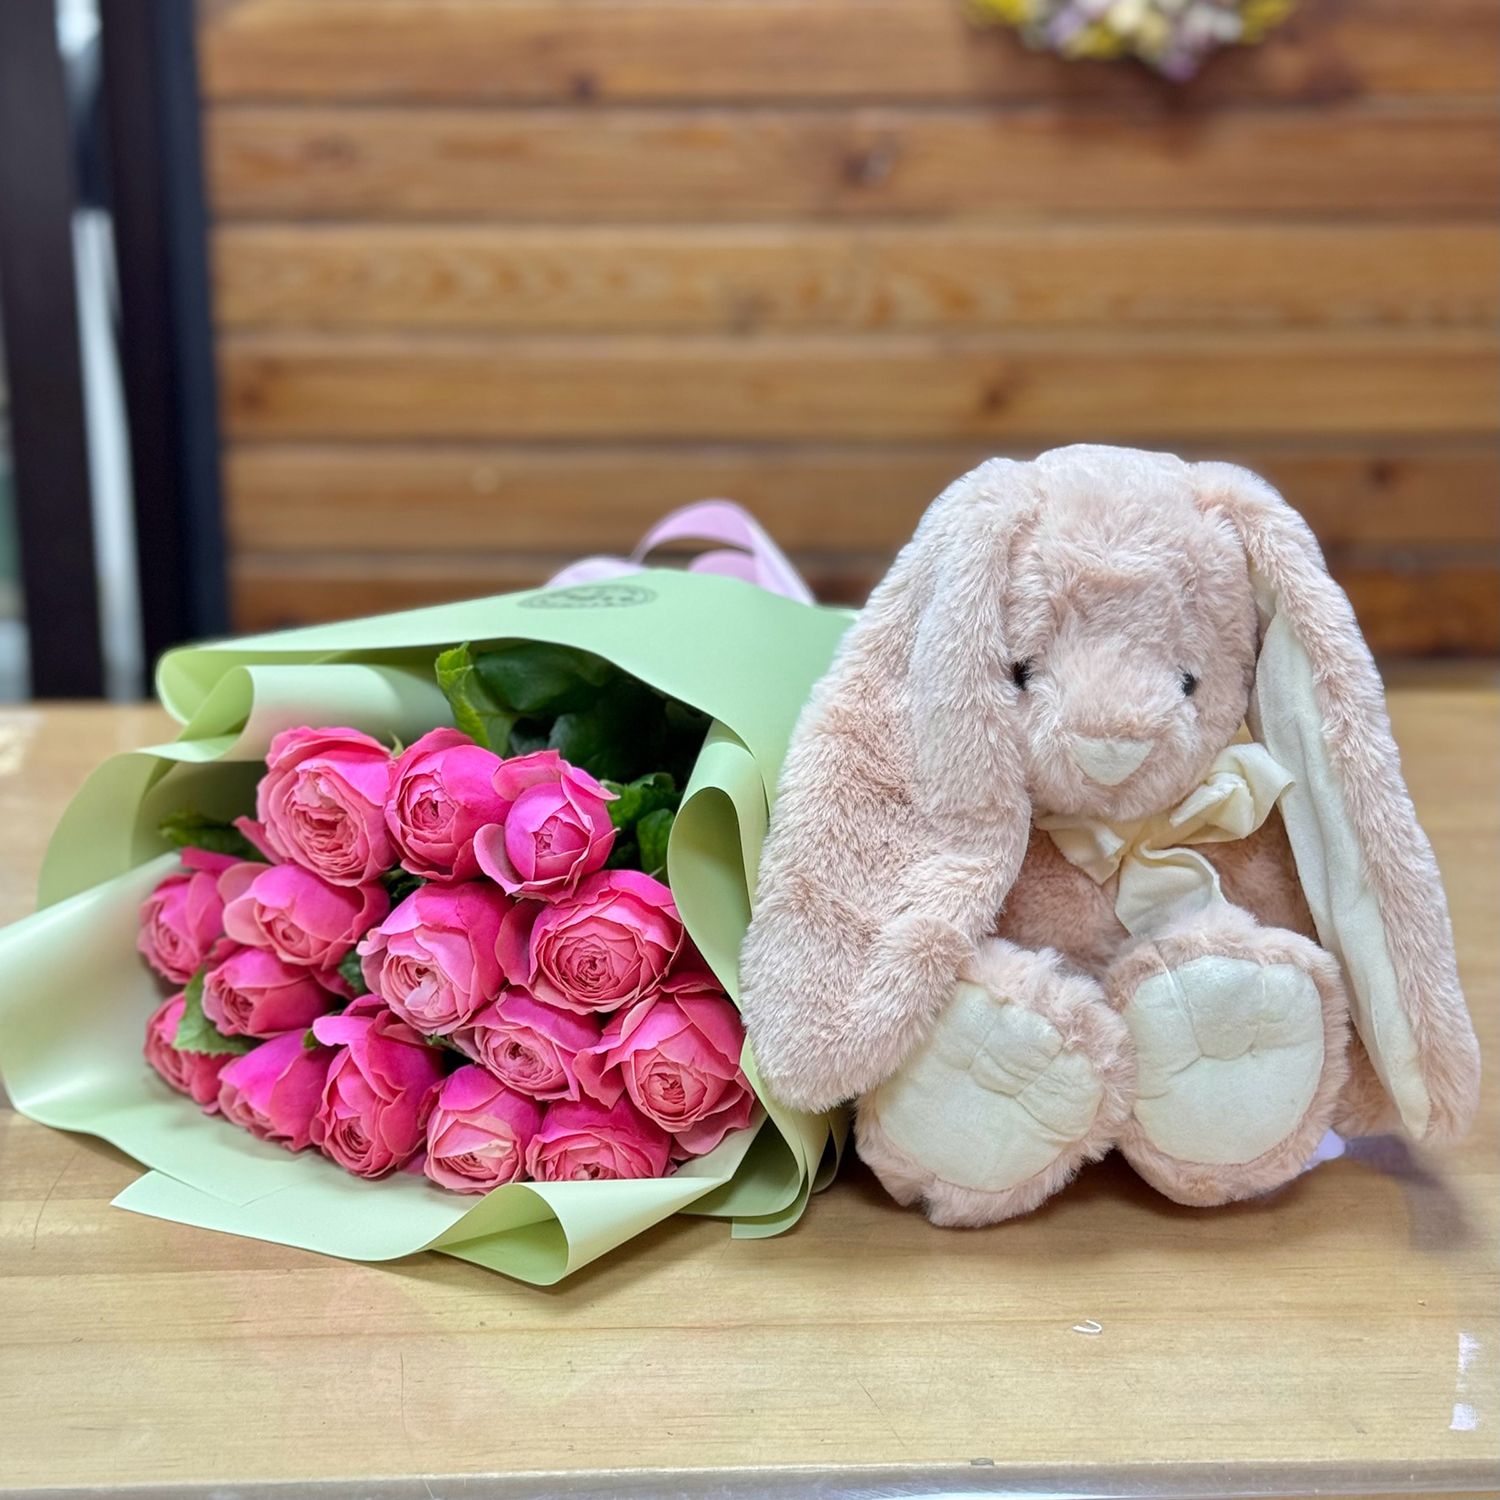 Pink roses and a bunny Sharjah